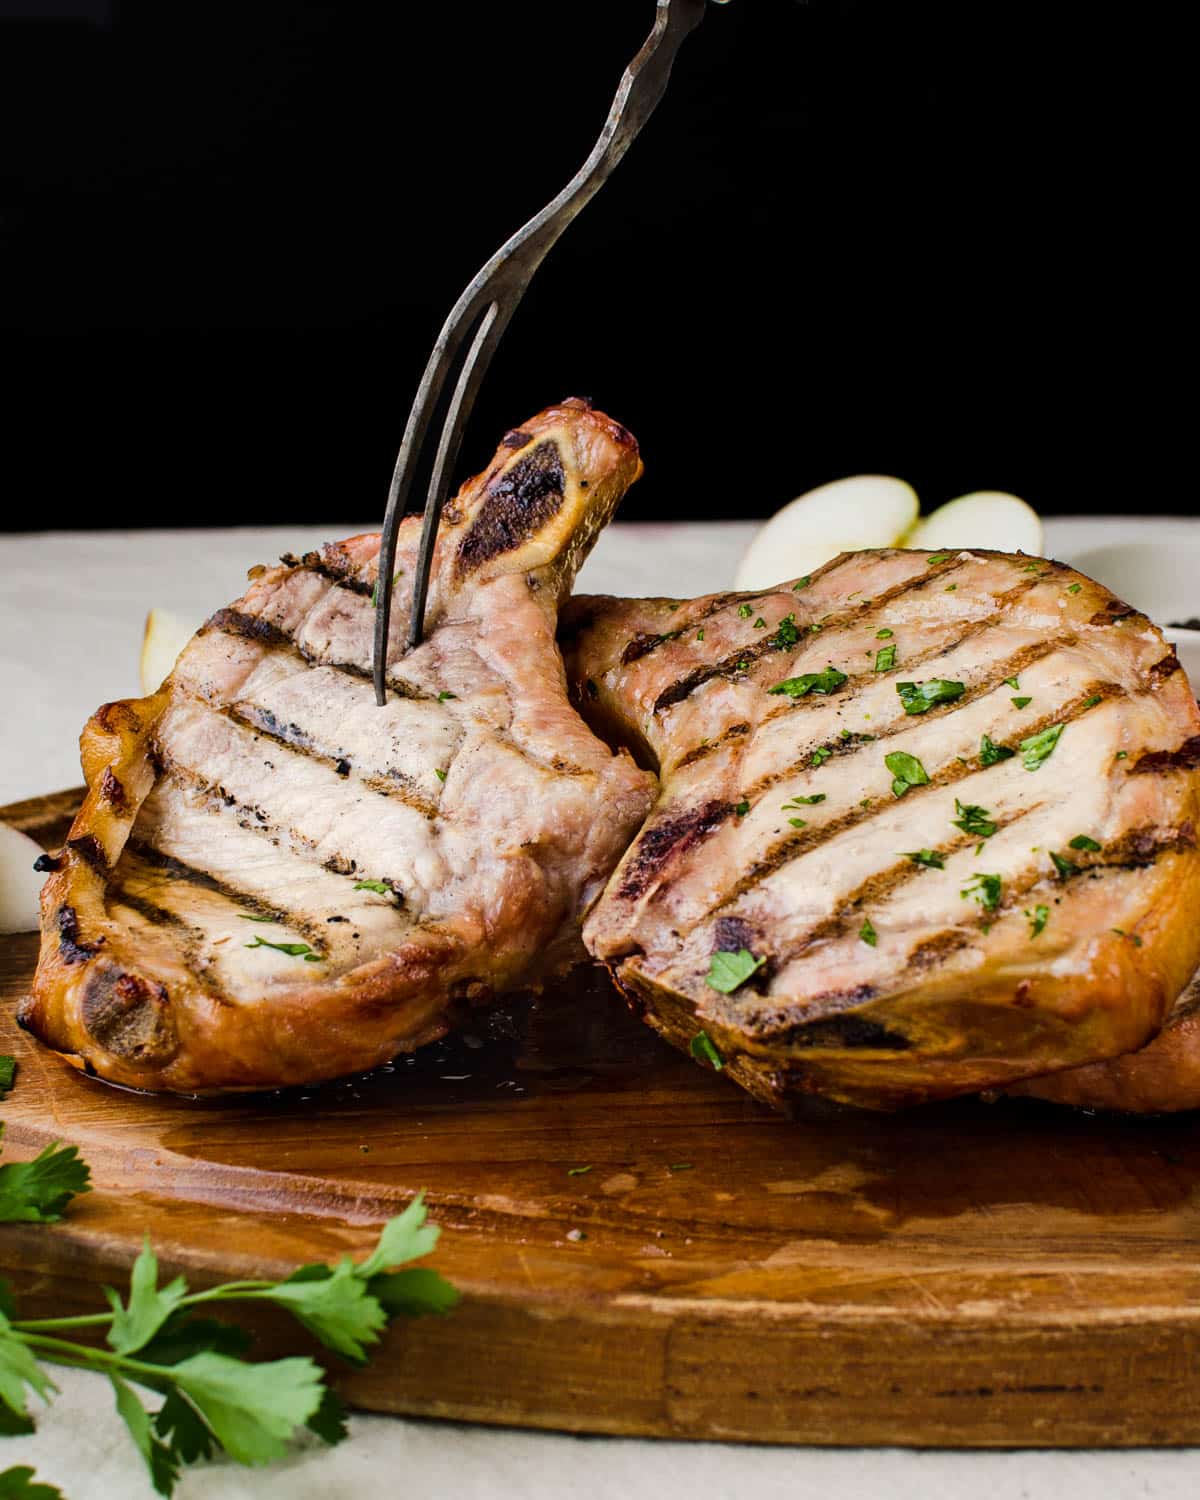 A cutting board piled with the best juicy, grilled pork chops ever.